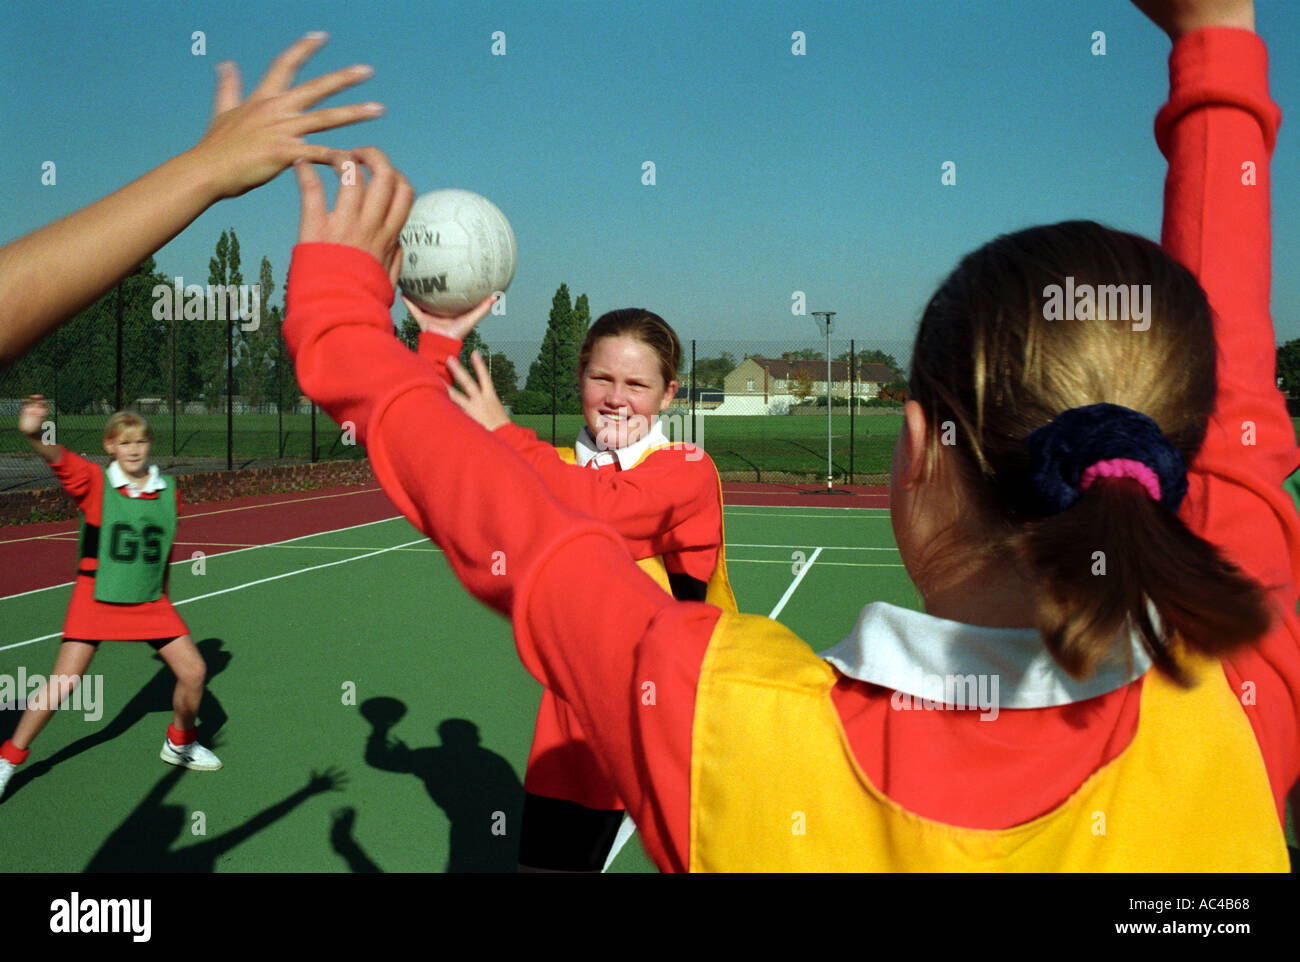 Females playinGBasket netball at a secondary school Stock Photo